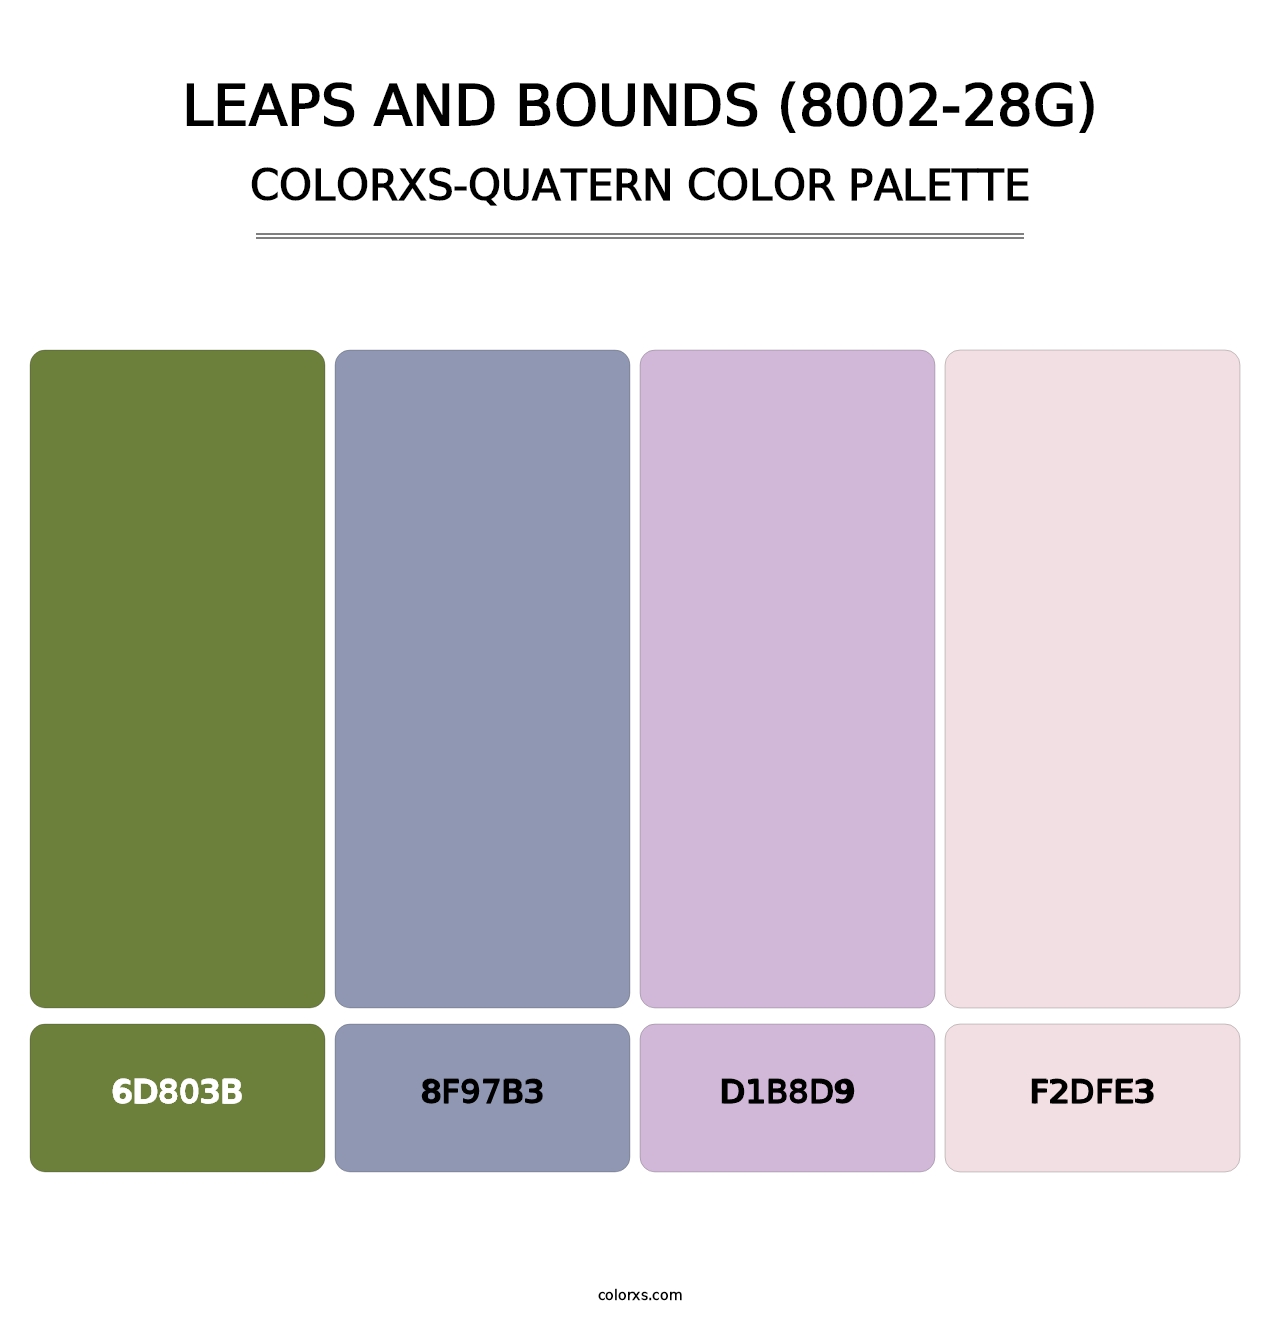 Leaps and Bounds (8002-28G) - Colorxs Quatern Palette